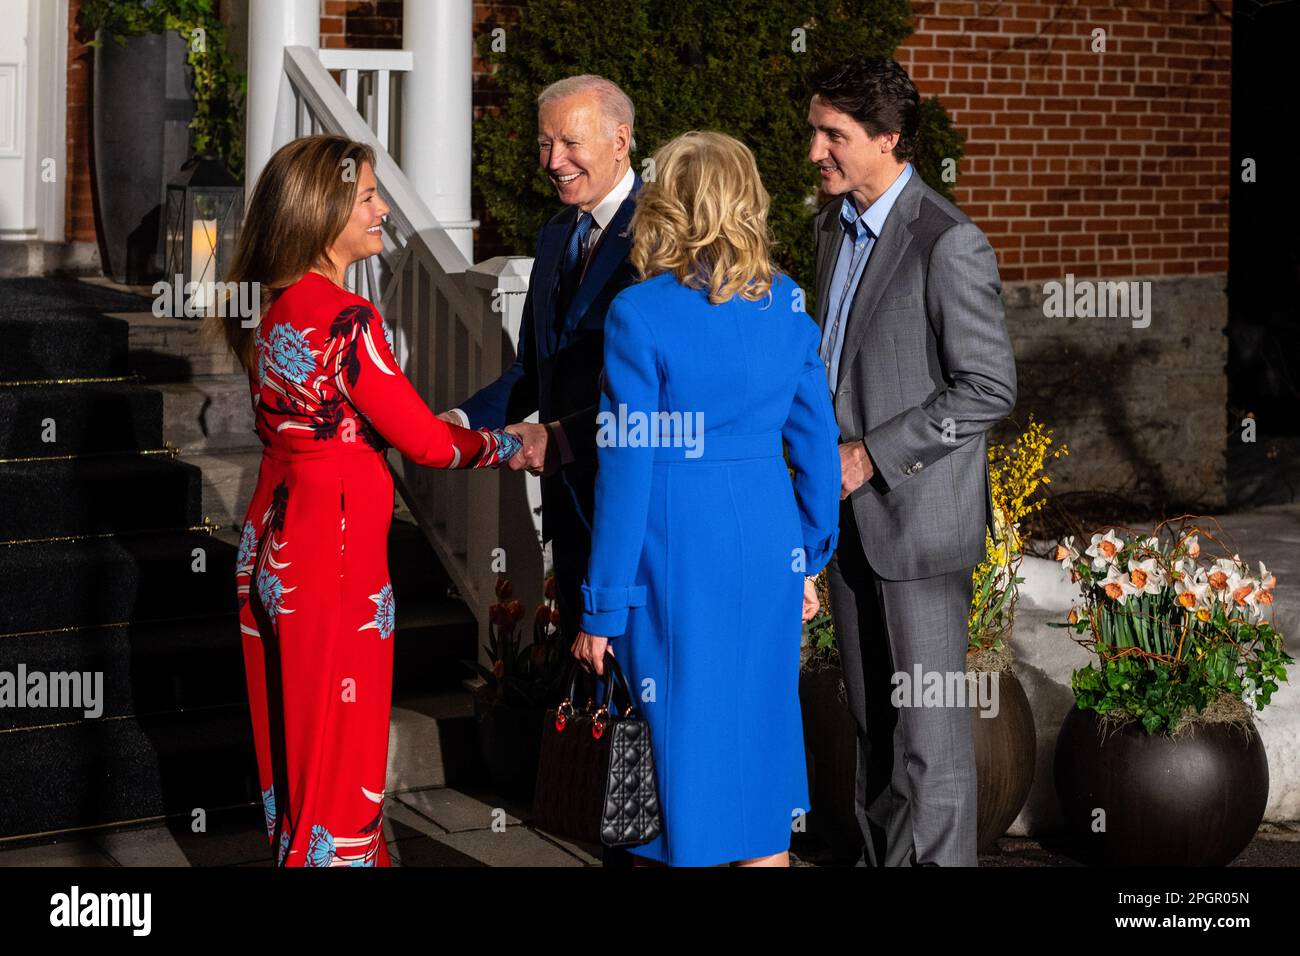 U.S. President Joe Biden (L2) shakes hands with Canadian First Lady Sophie Grégoire Trudeau (L) while Canadian Prime Minister Justin Trudeau (R) speaks with U.S. First Lady Jill Biden (C) during Biden's first official visit to the country since he became president, outside of Rideau Cottage in Ottawa. Though visits from American presidents to Canada typically take place soon after election, Biden's inaugural visit to the northern neighbour has been delayed due to COVID-19 travel restrictions. (Photo by Katherine Cheng/SOPA Images/Sipa USA) Stock Photo